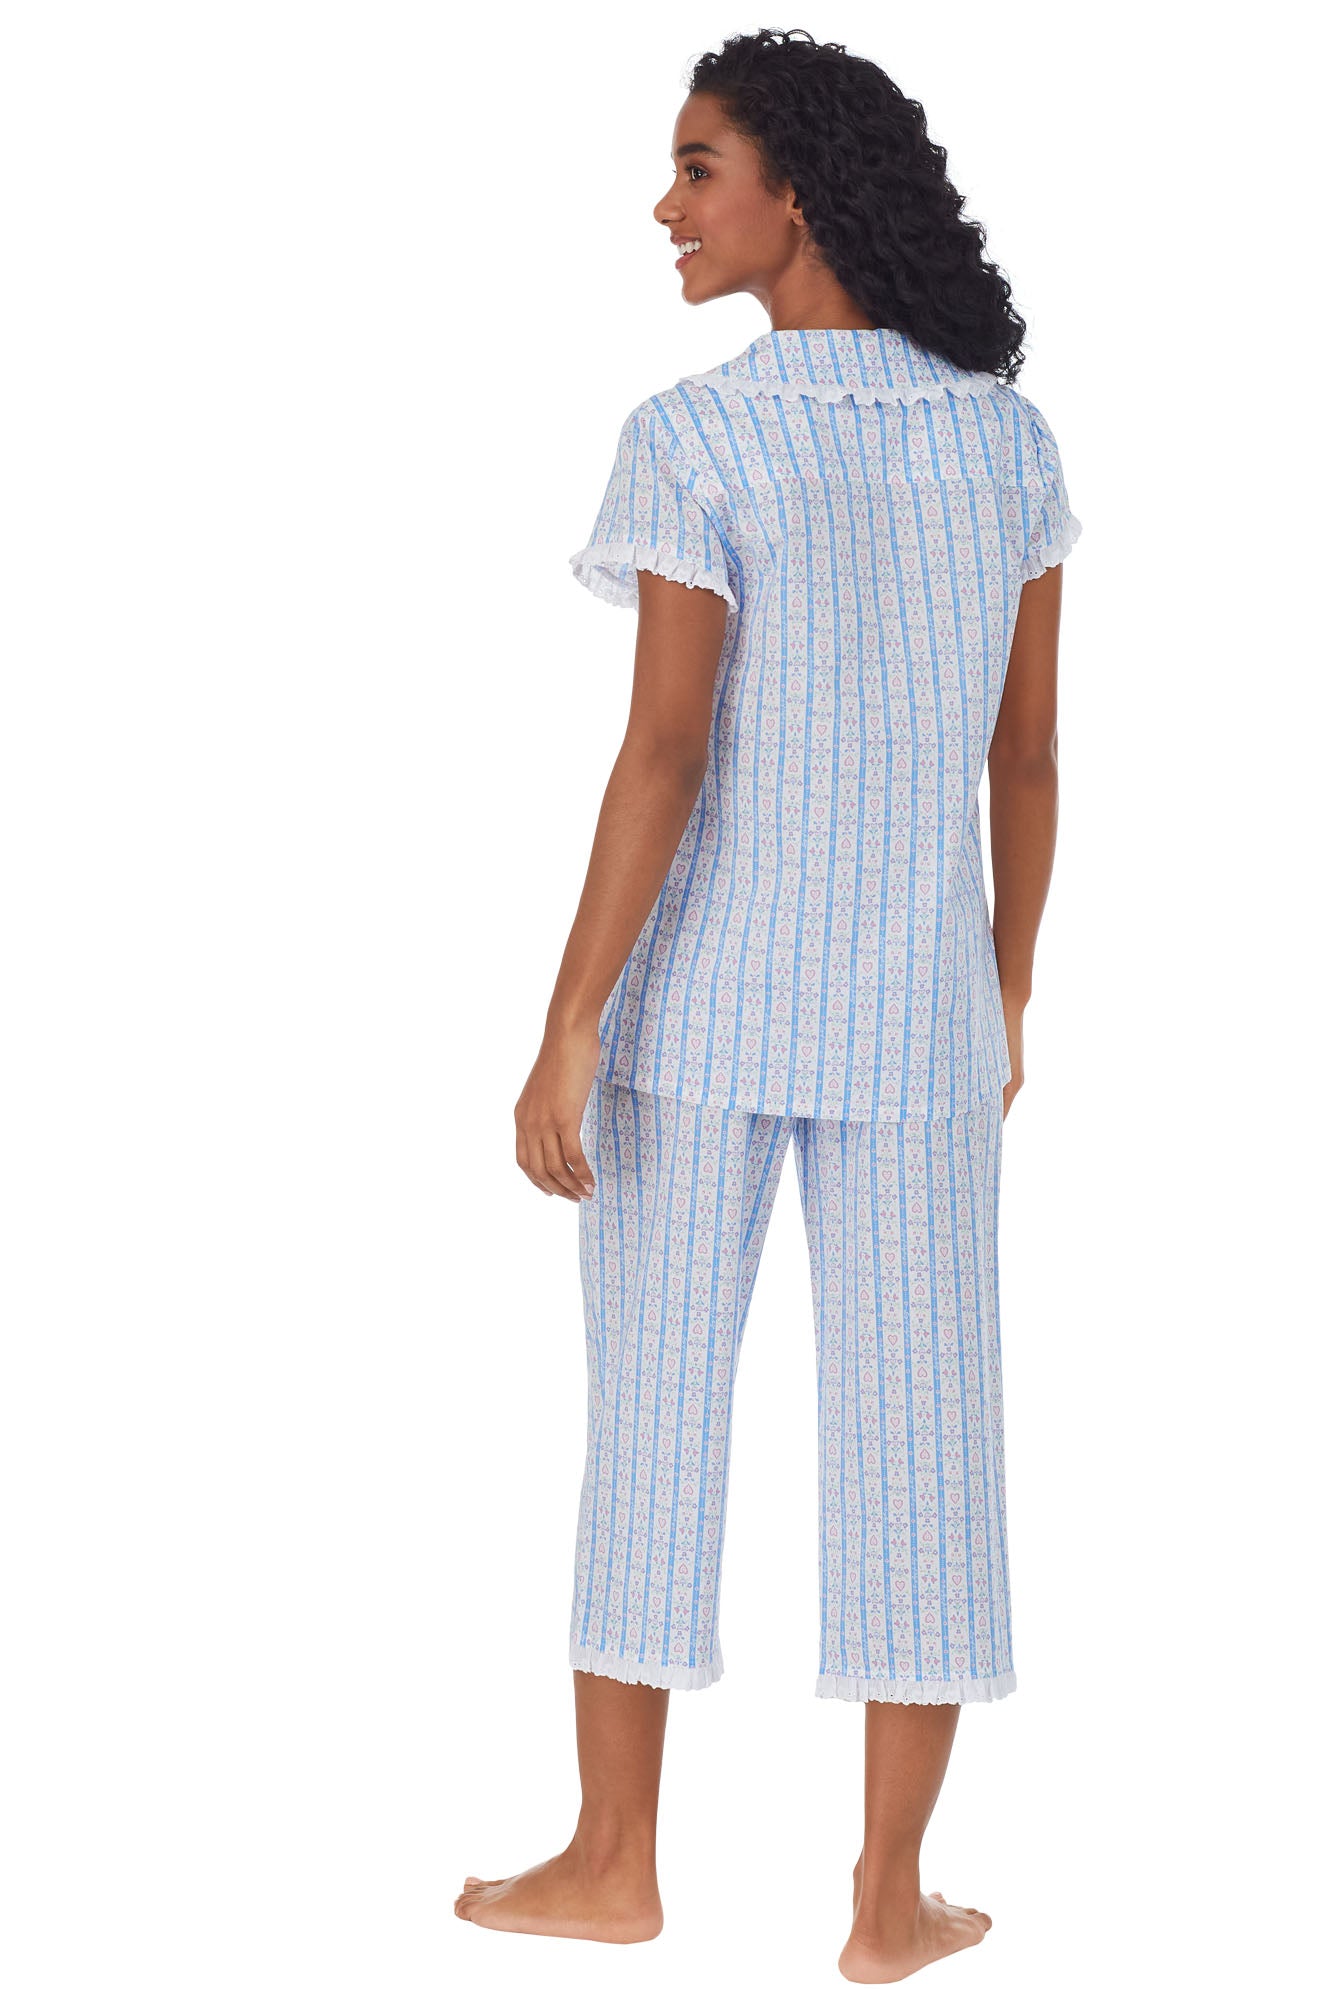 Back view of A lady wearing white pajama with blue pattern